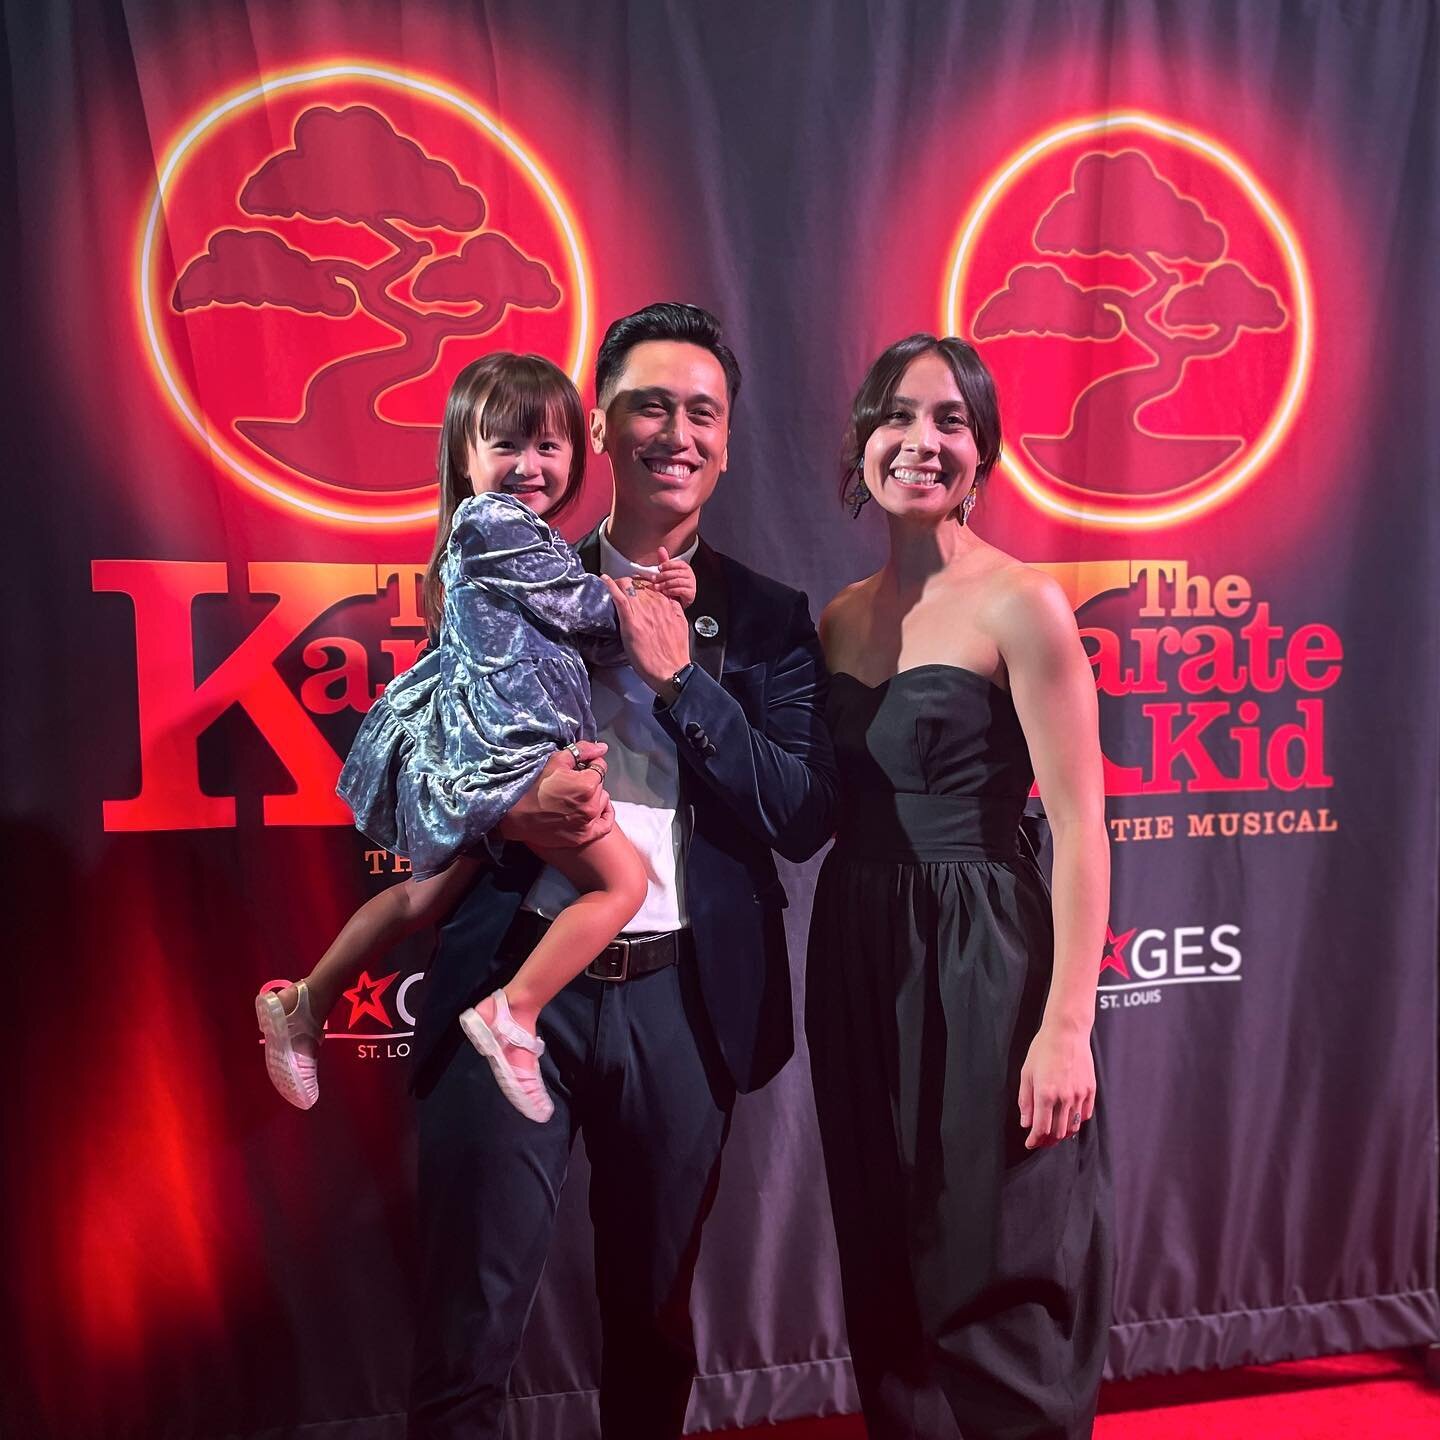 Opening night (last week) for Karate Kid the musical.  Perfect moment to get free Christmas 2022 family photos.  Also a great place to teach a toddler red carpet etiquette - which she clearly demonstrates in 7 &amp; 8.

While it&rsquo;s been a dream 